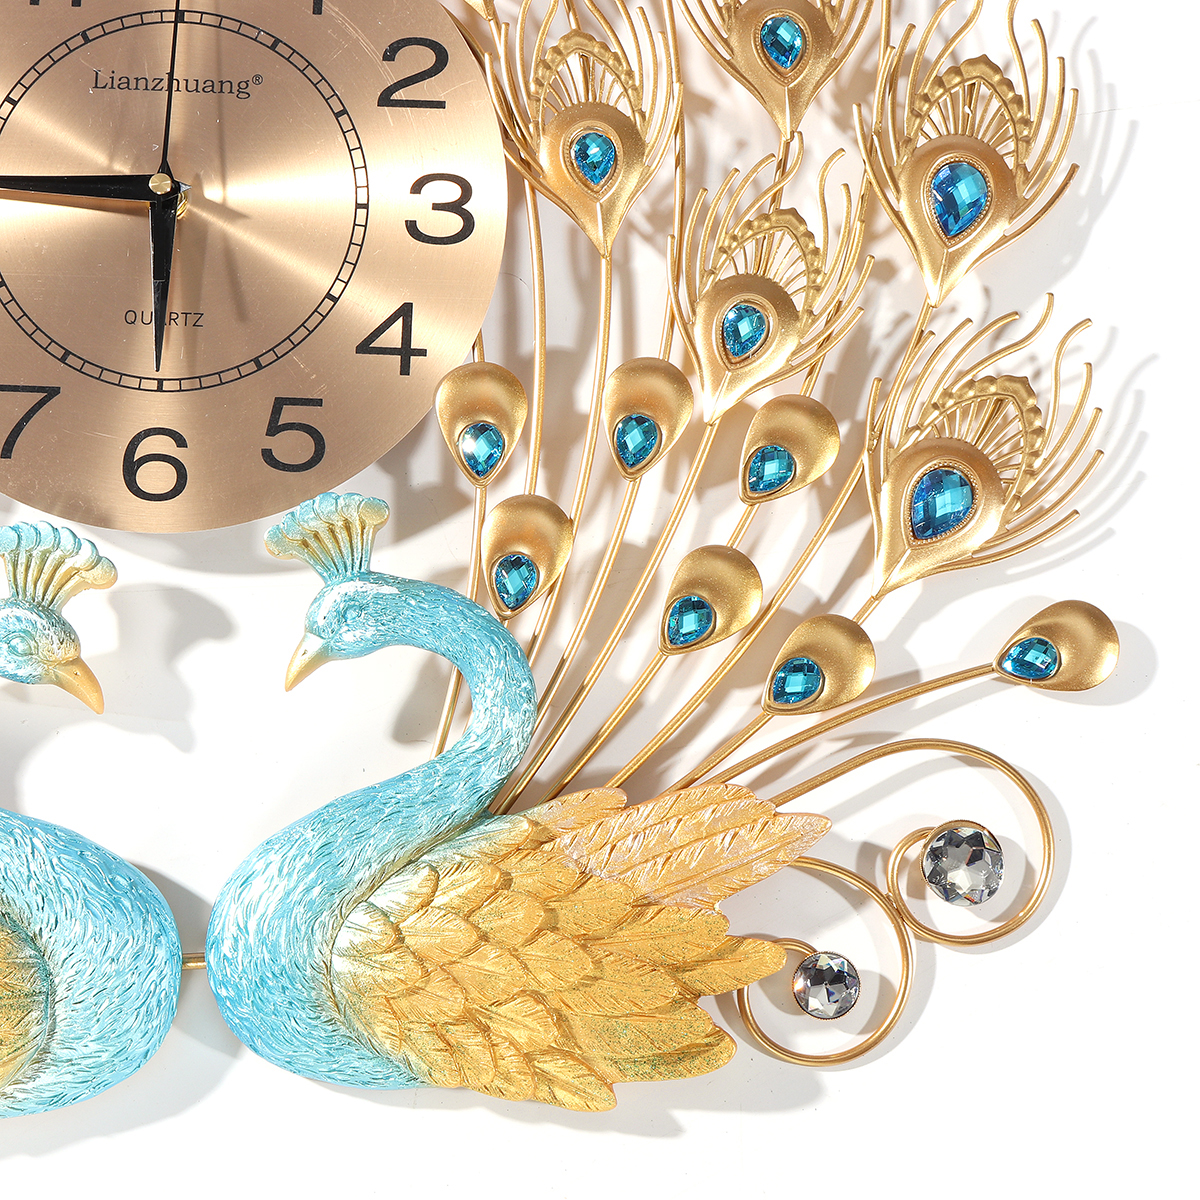 3D-Peacock-Wall-Clock-Large-Accurate-Mute-Metal-Art-Creative-Decor-Home-1743546-8